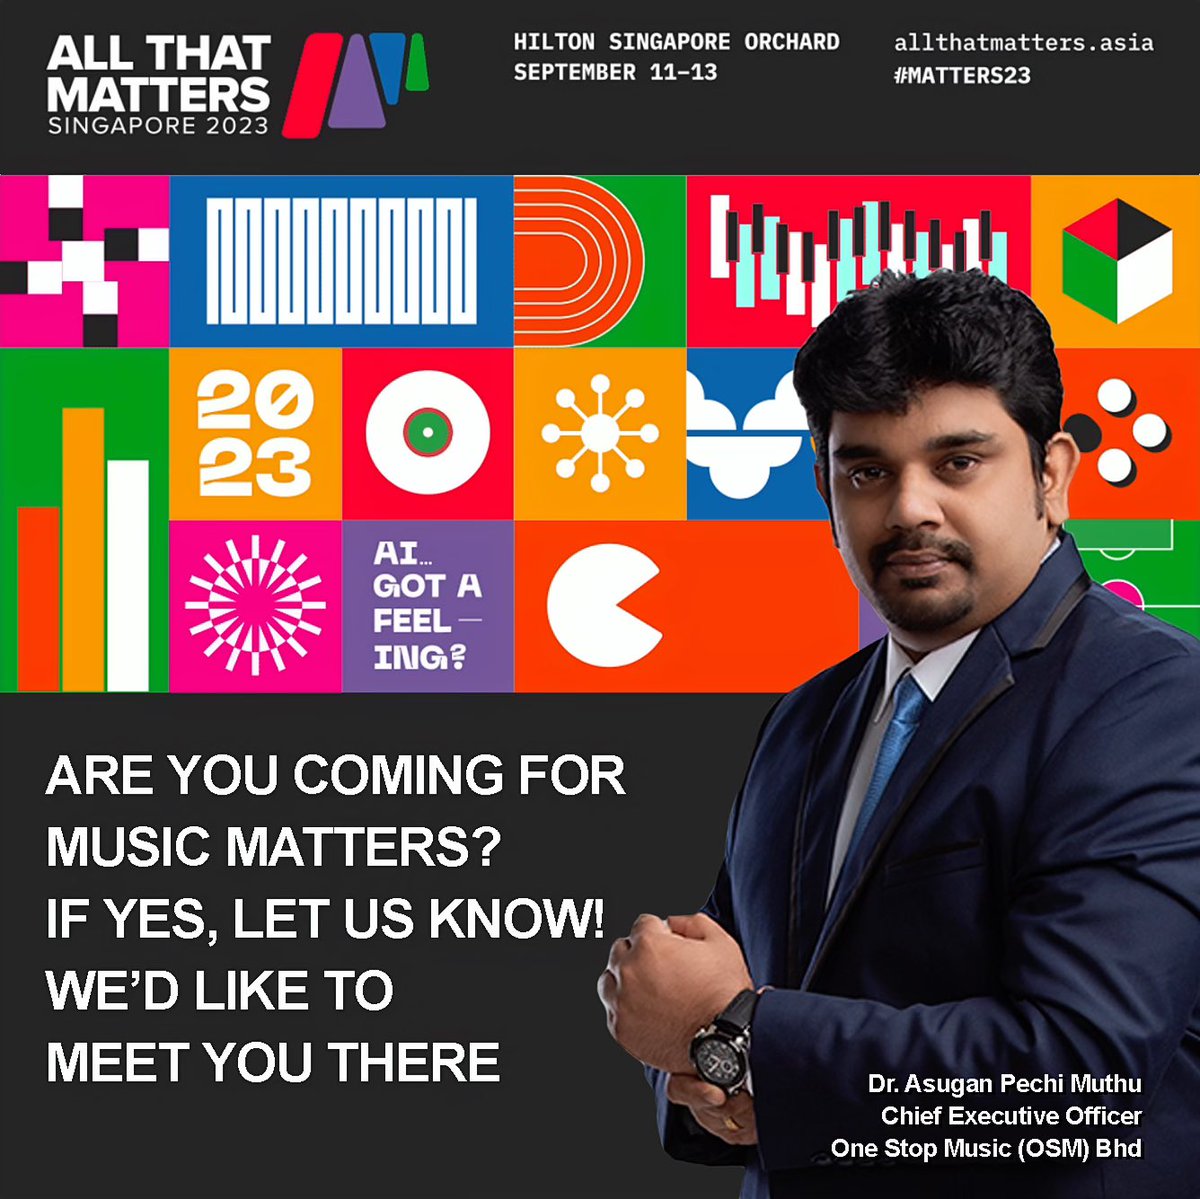 The much-awaited ALL THAT MATTERS conference in Singapore. If you're interested in meeting with OSM, do contact us. We shall be there from 10-13 Sept. See you there!'
#musicmatters #allthatmatters #ATM2023 #musicconference #musicbiz #musicbusiness #allthatmatters2023 #matters23